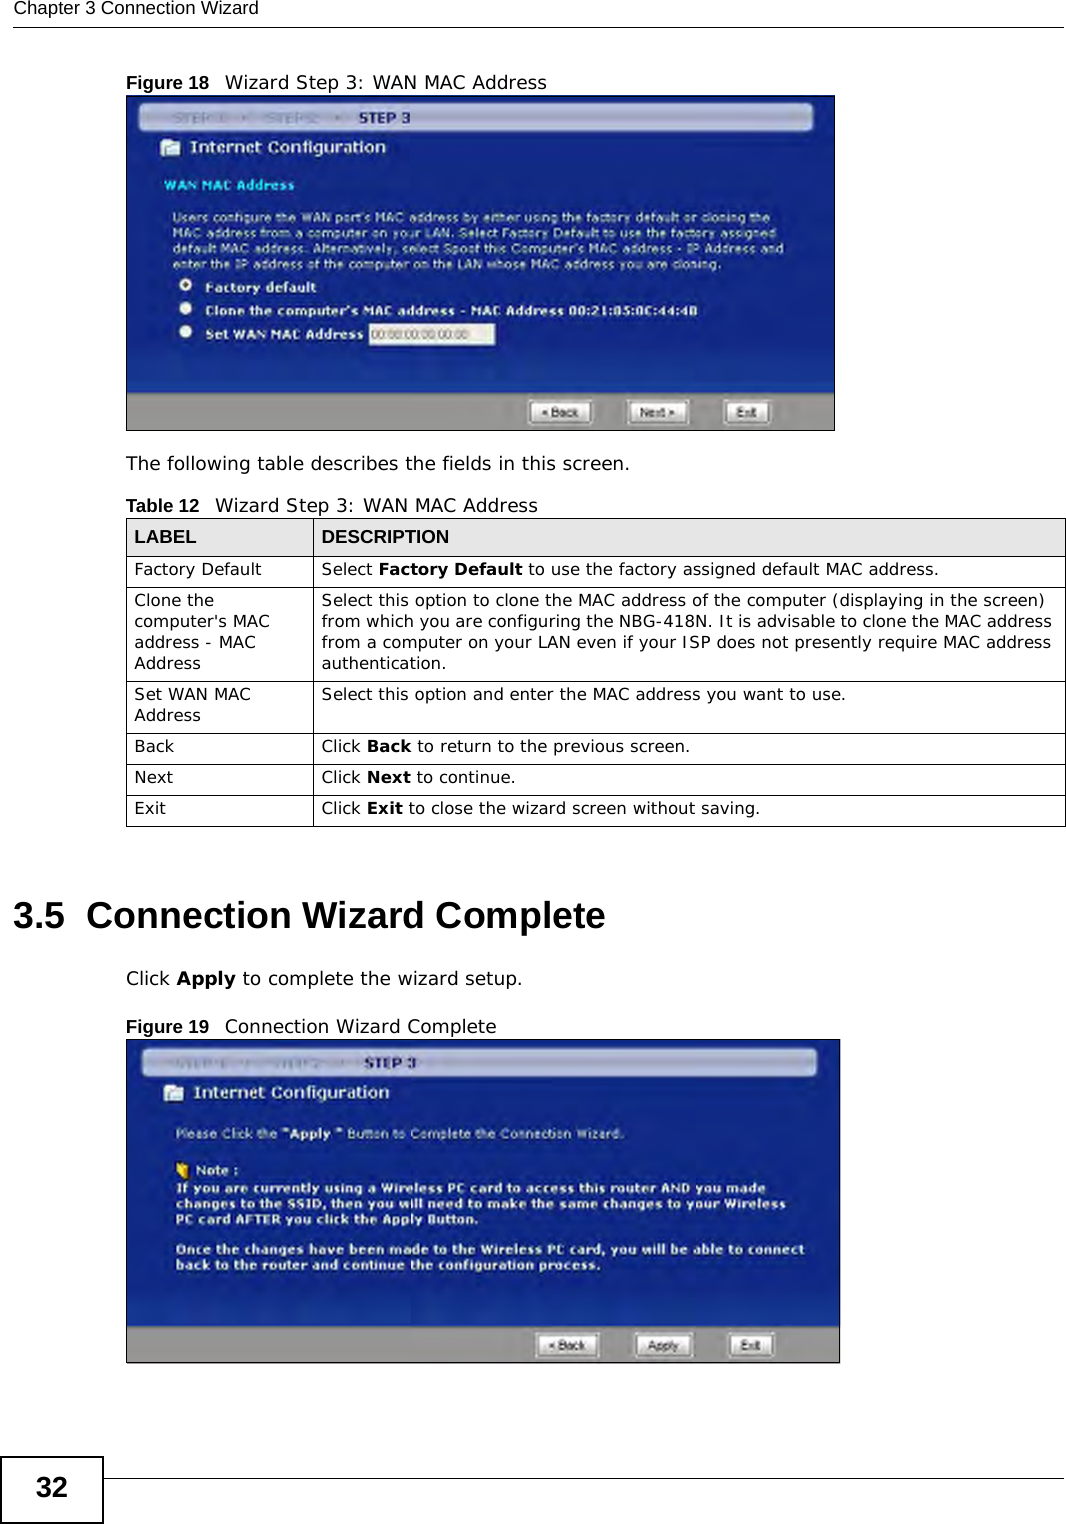 Chapter 3 Connection Wizard32Figure 18   Wizard Step 3: WAN MAC AddressThe following table describes the fields in this screen.3.5  Connection Wizard CompleteClick Apply to complete the wizard setup.Figure 19   Connection Wizard CompleteTable 12   Wizard Step 3: WAN MAC AddressLABEL DESCRIPTIONFactory Default Select Factory Default to use the factory assigned default MAC address.Clone the computer&apos;s MAC address - MAC AddressSelect this option to clone the MAC address of the computer (displaying in the screen) from which you are configuring the NBG-418N. It is advisable to clone the MAC address from a computer on your LAN even if your ISP does not presently require MAC address authentication. Set WAN MAC Address Select this option and enter the MAC address you want to use.Back Click Back to return to the previous screen.NextClick Next to continue. ExitClick Exit to close the wizard screen without saving.